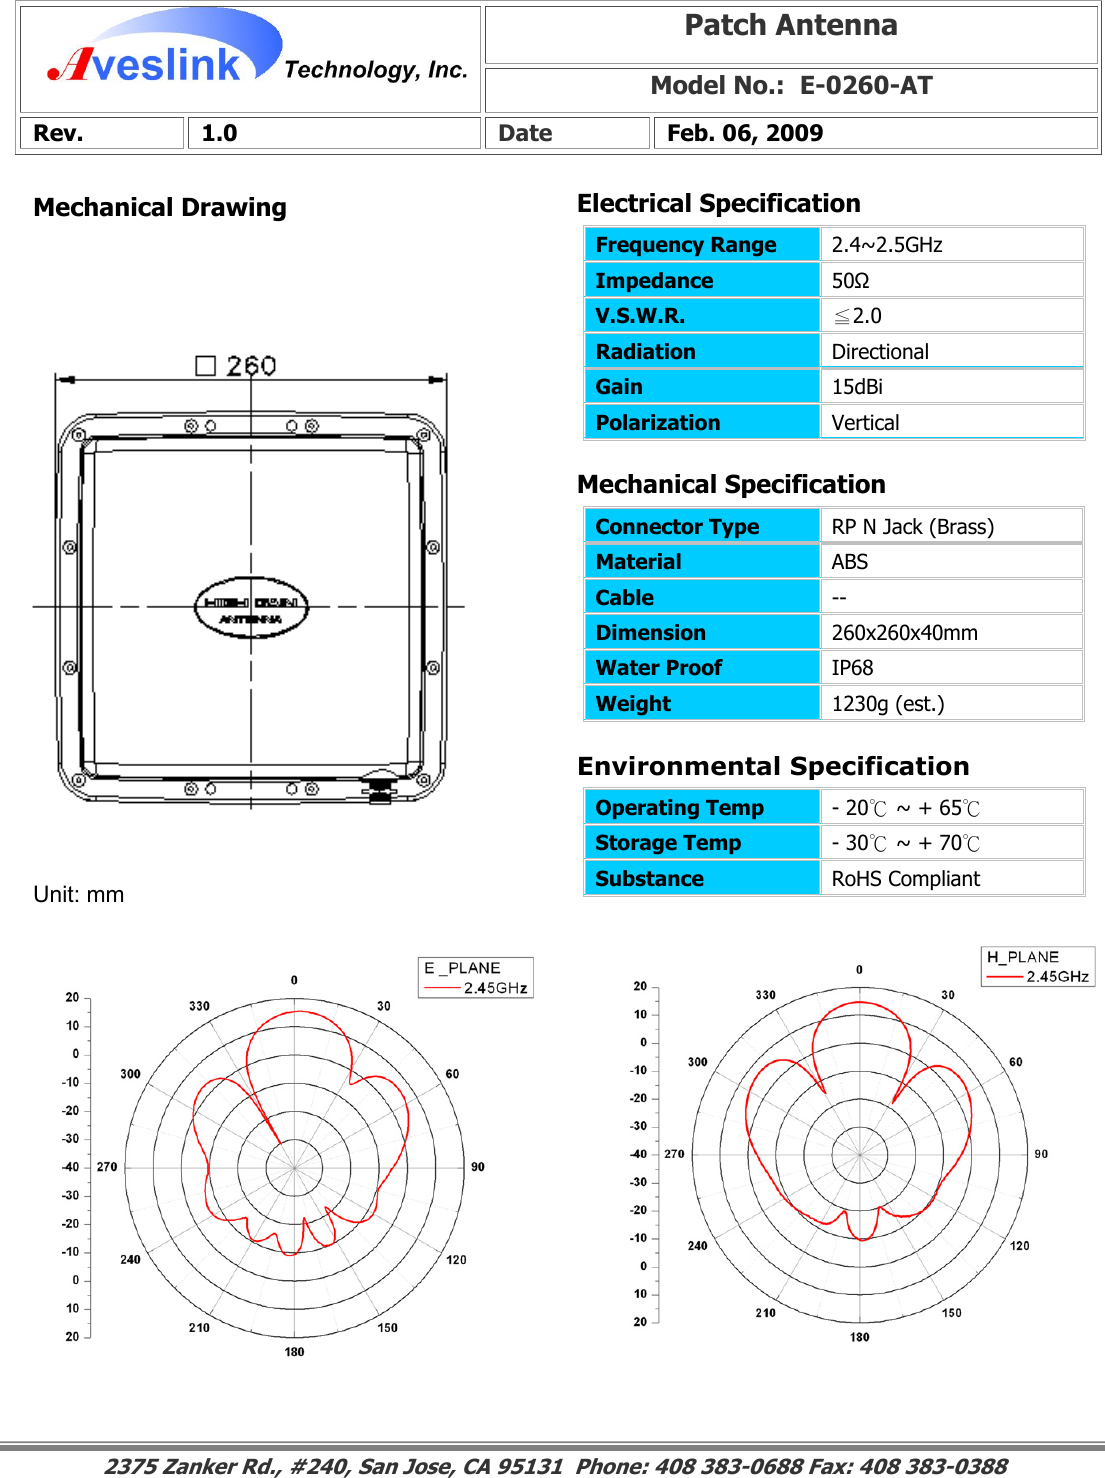 Mechanical DrawingMechanical Specification Environmental SpecificationPatch Antenna Model No.:  E-0260-AT Rev. 1.0  Date  Feb. 06, 2009 Connector Type   RP N Jack (Brass) Material  ABS Cable  -- Dimension  260x260x40mm Water Proof  IP68 Weight  1230g (est.)                                                                                                                                                                                                                   Operating Temp  - 20℃ ~ + 65℃ Storage Temp  - 30℃ ~ + 70℃ Substance  RoHS Compliant Electrical SpecificationFrequency Range   2.4~2.5GHz Impedance  50Ω V.S.W.R.  ≦2.0 Radiation  Directional Gain  15dBi Polarization  Vertical Unit: mm 2375 Zanker Rd., #240, San Jose, CA 95131  Phone: 408 383-0688 Fax: 408 383-0388